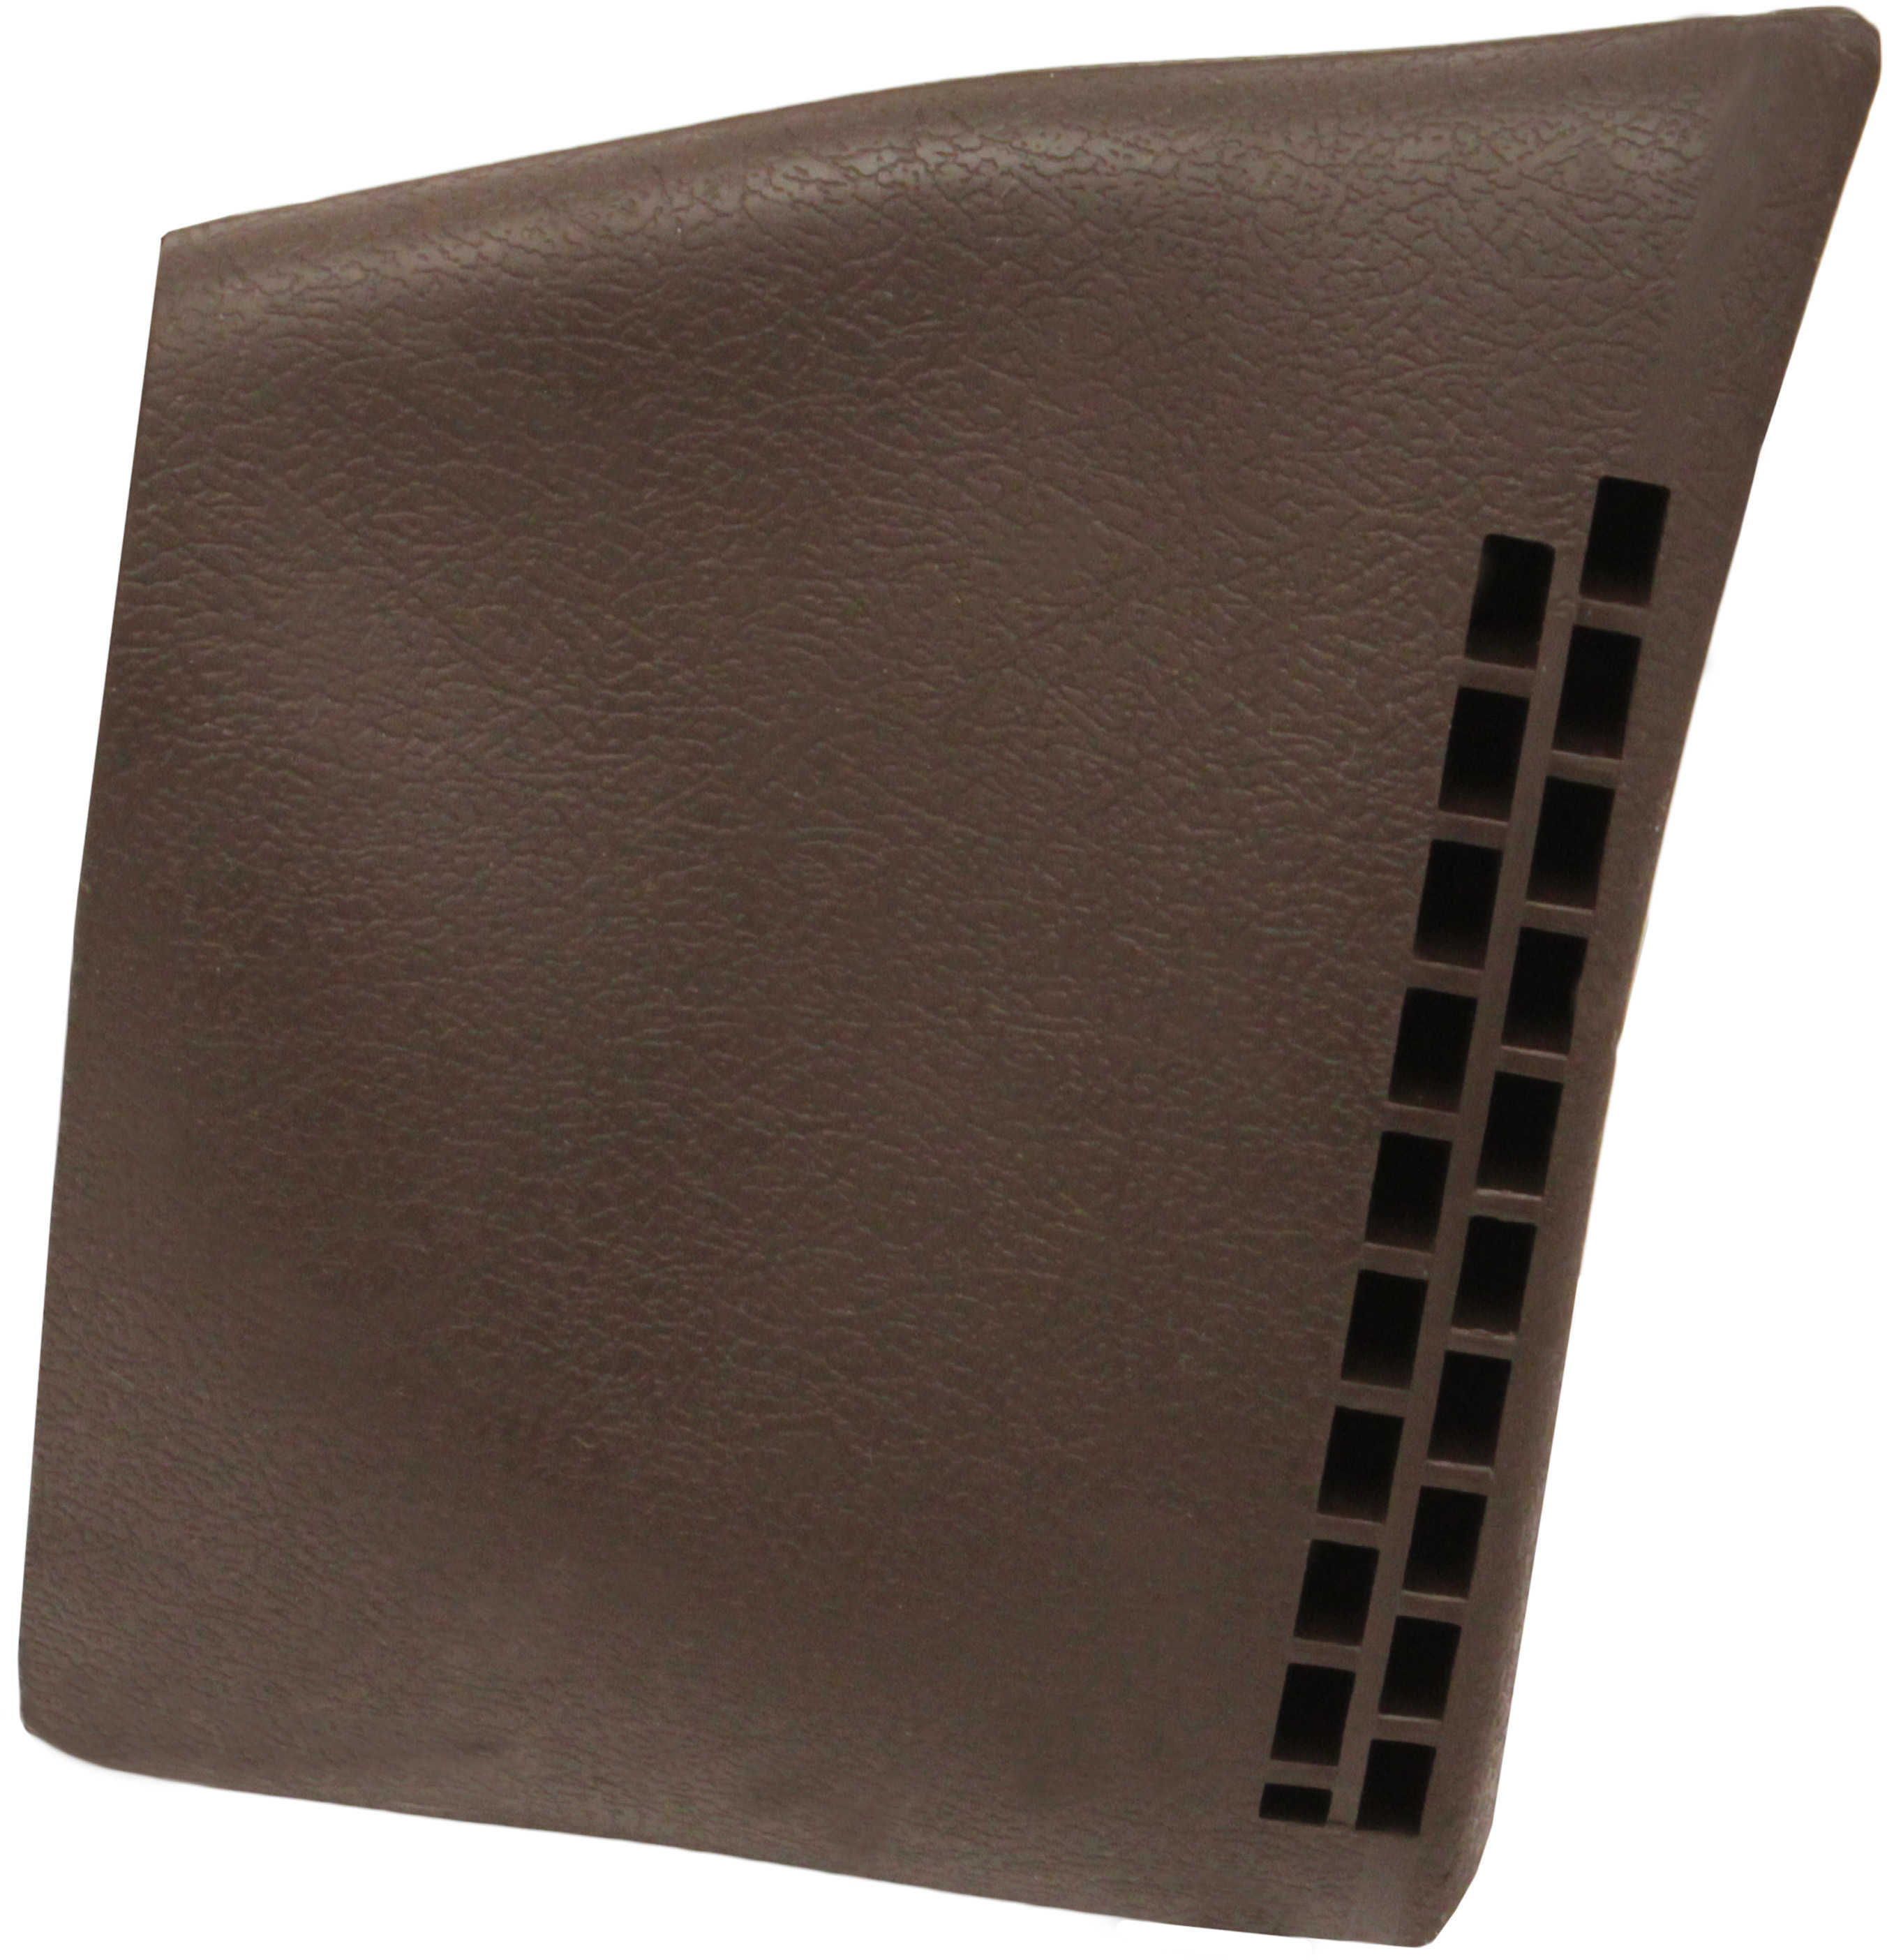 Butler Creek Deluxe Slip-on Recoil Pad - Brown Large 50327